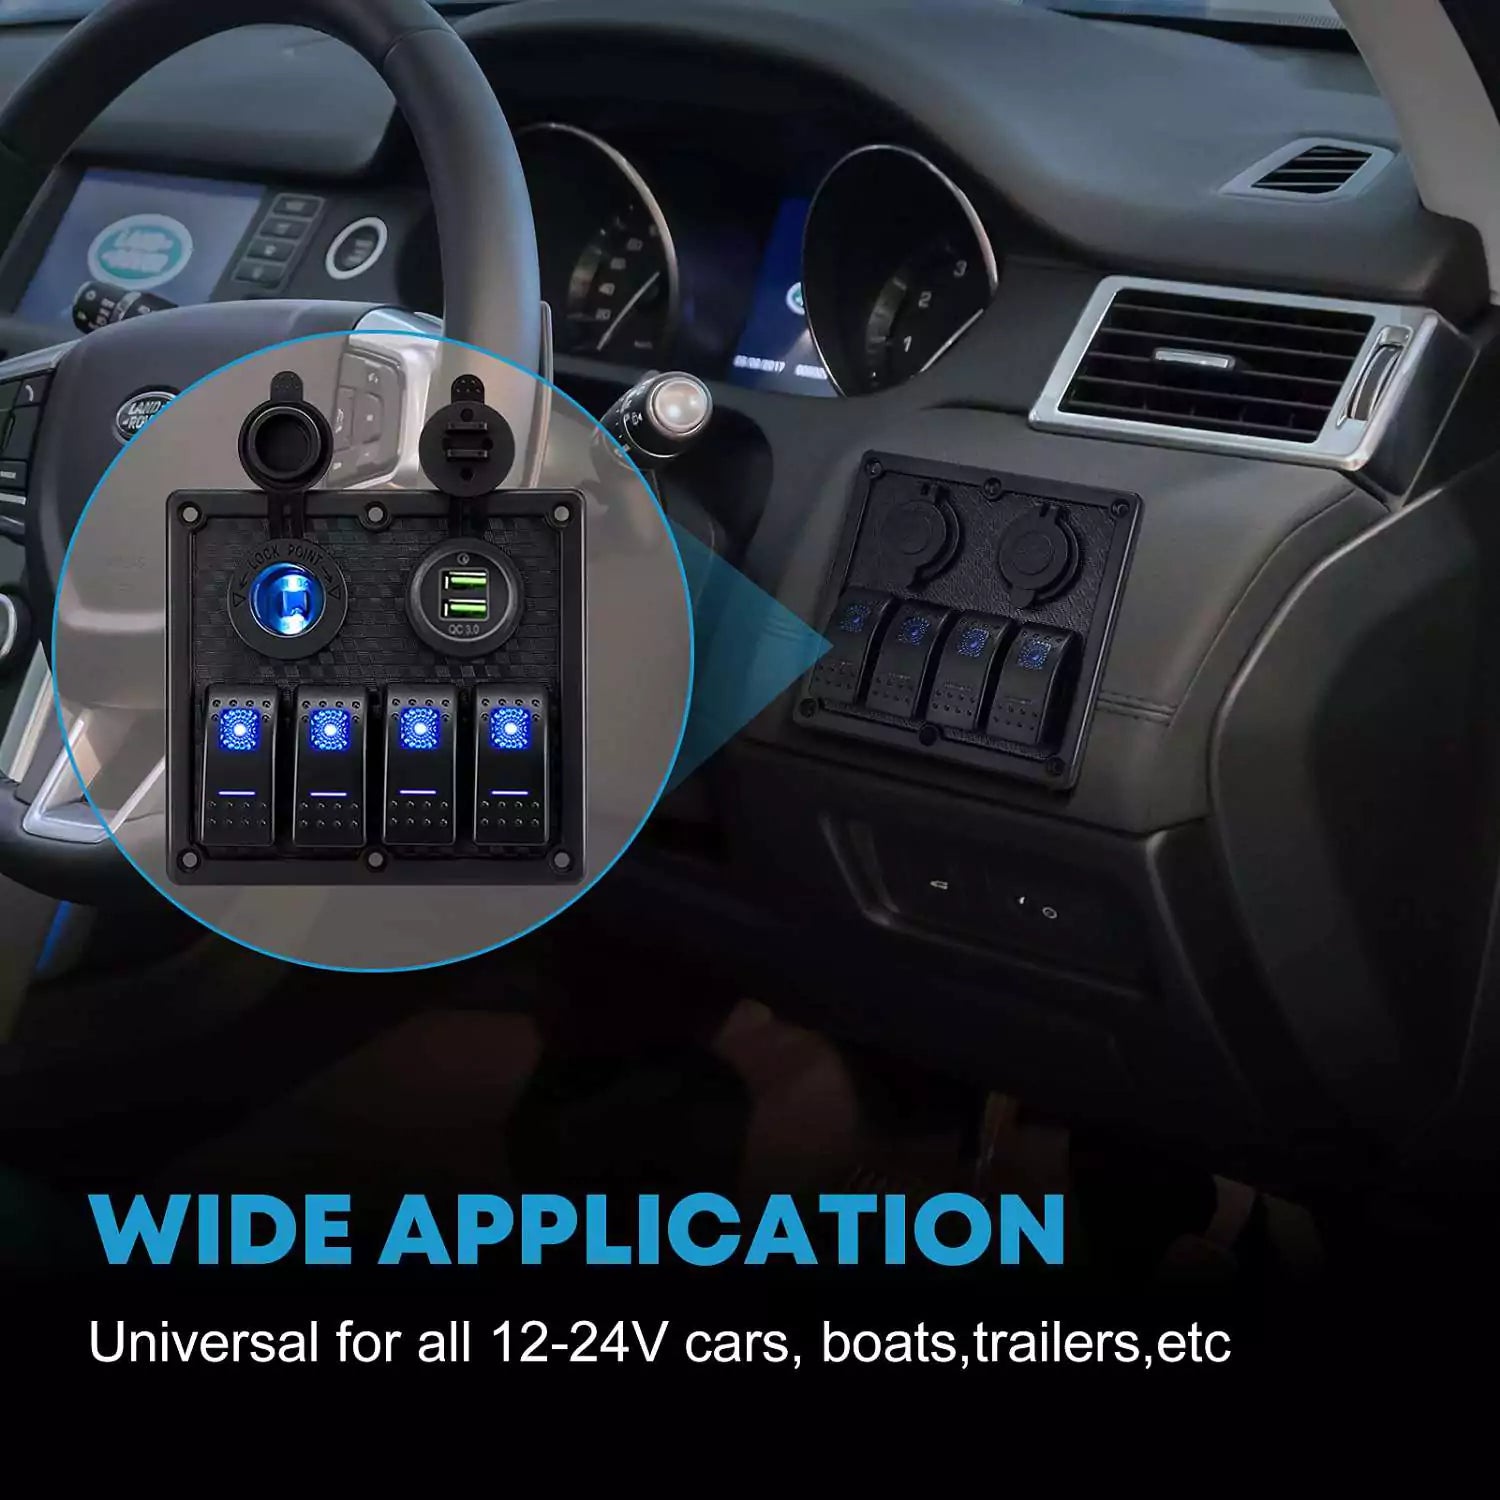 Automotive switch panel wide application for all 12-24V cars, boats, trailers, etc.